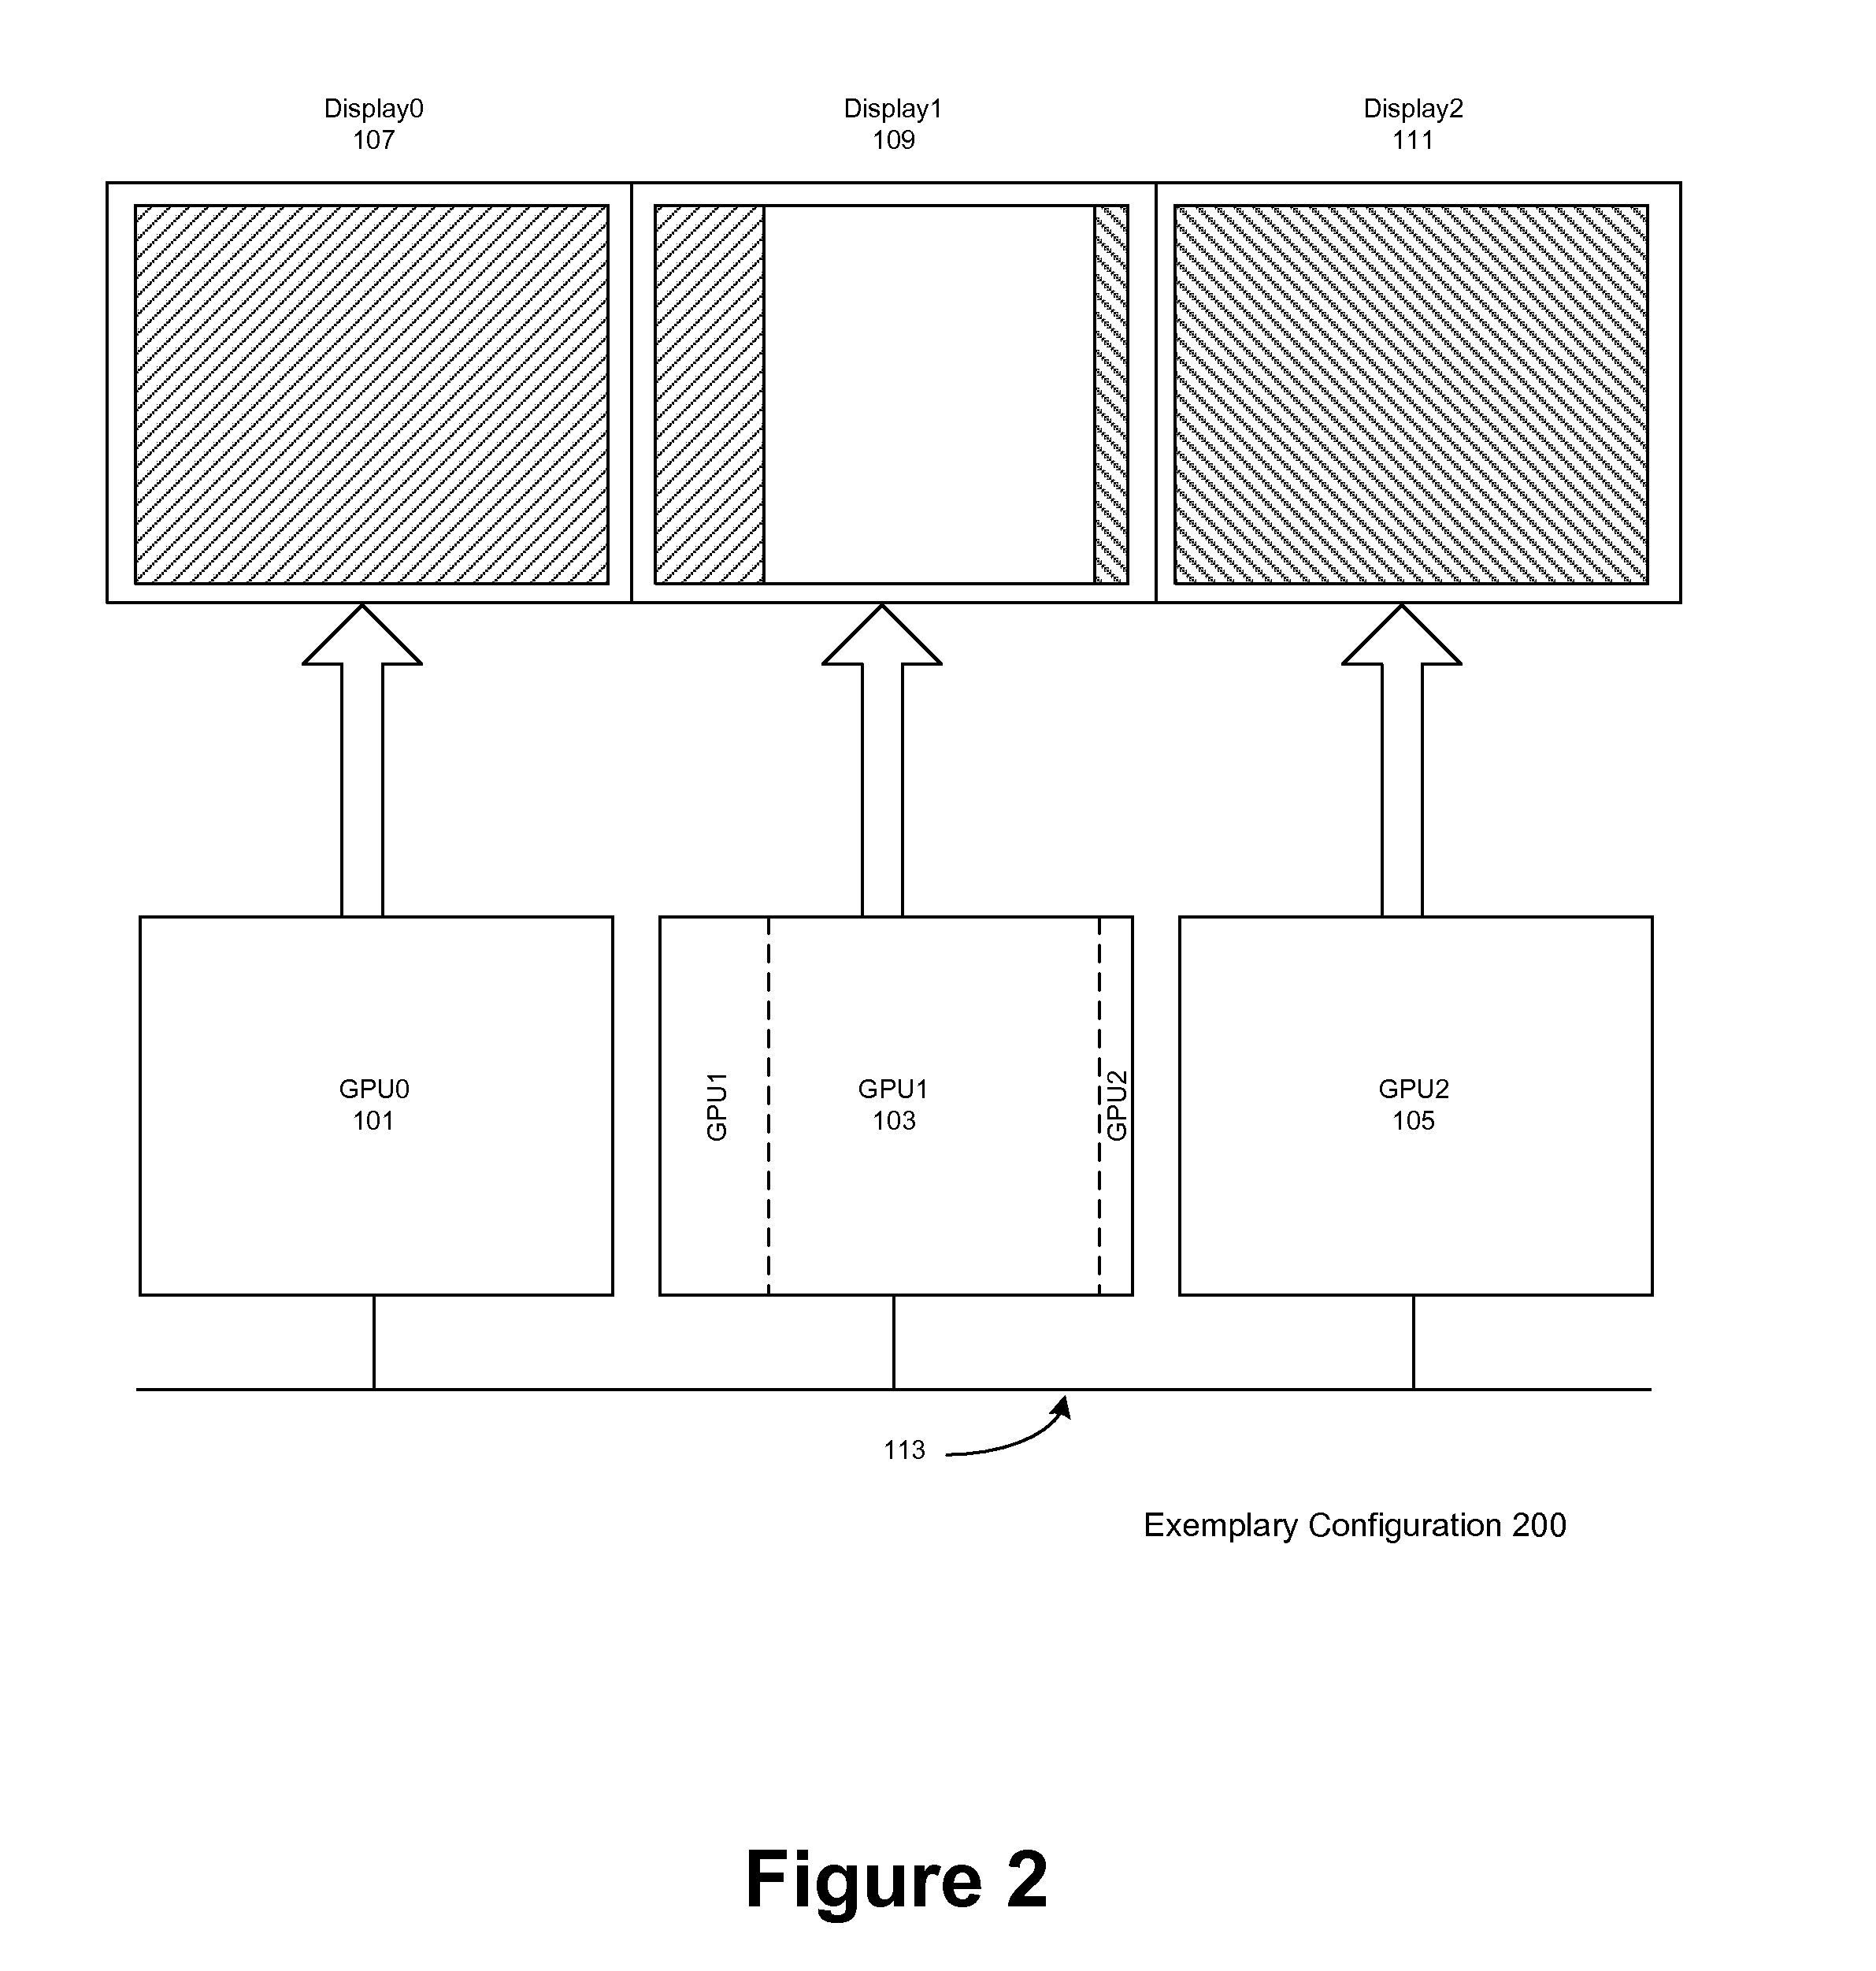 Load balancing in a system with multi-graphics processors and multi-display systems